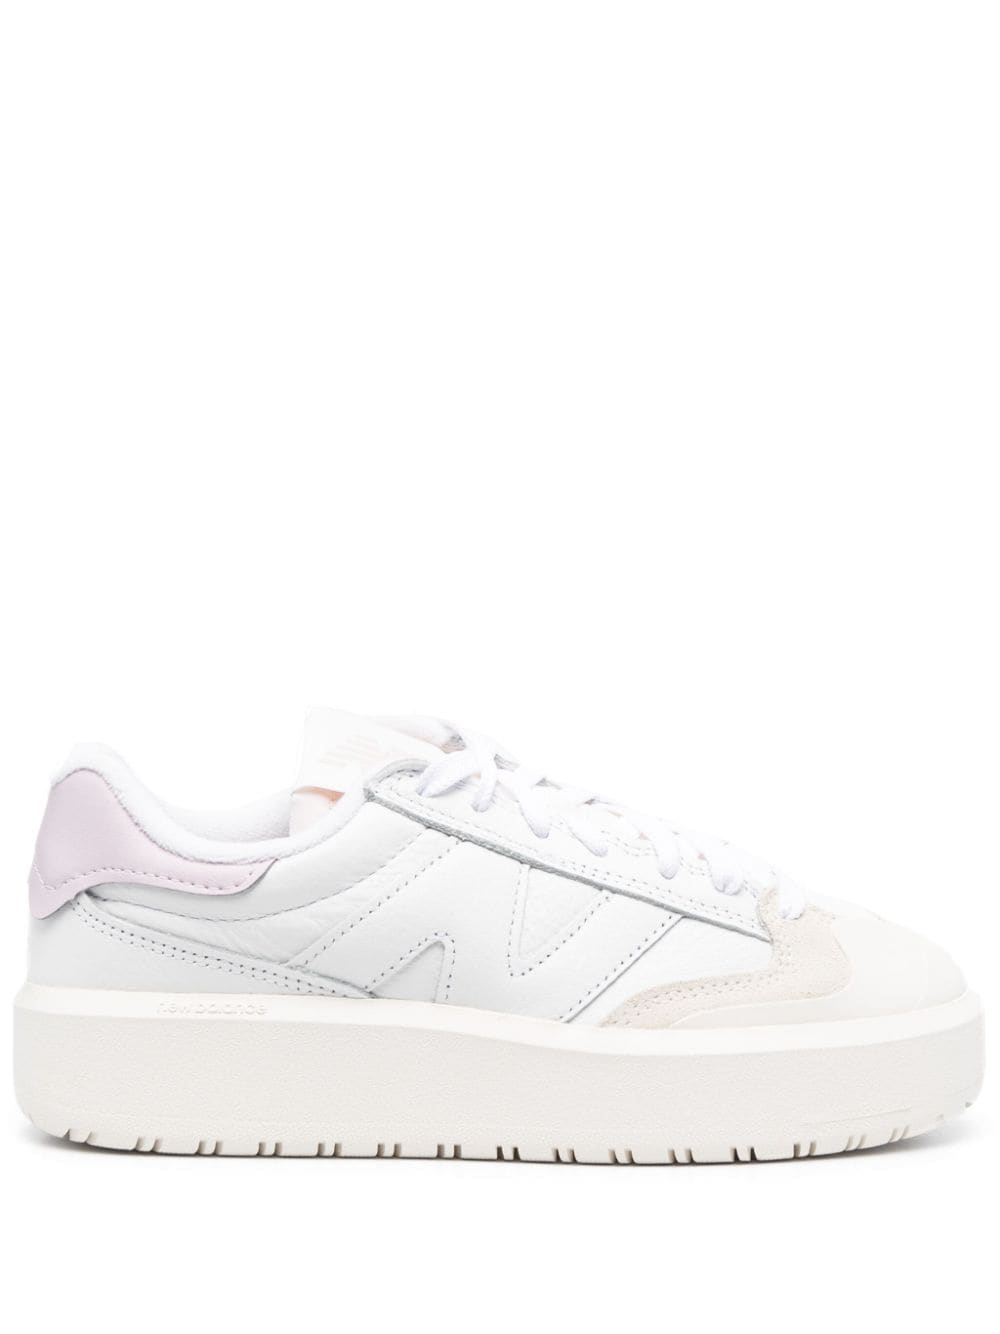 New Balance CT302 leather low-top sneakers - White